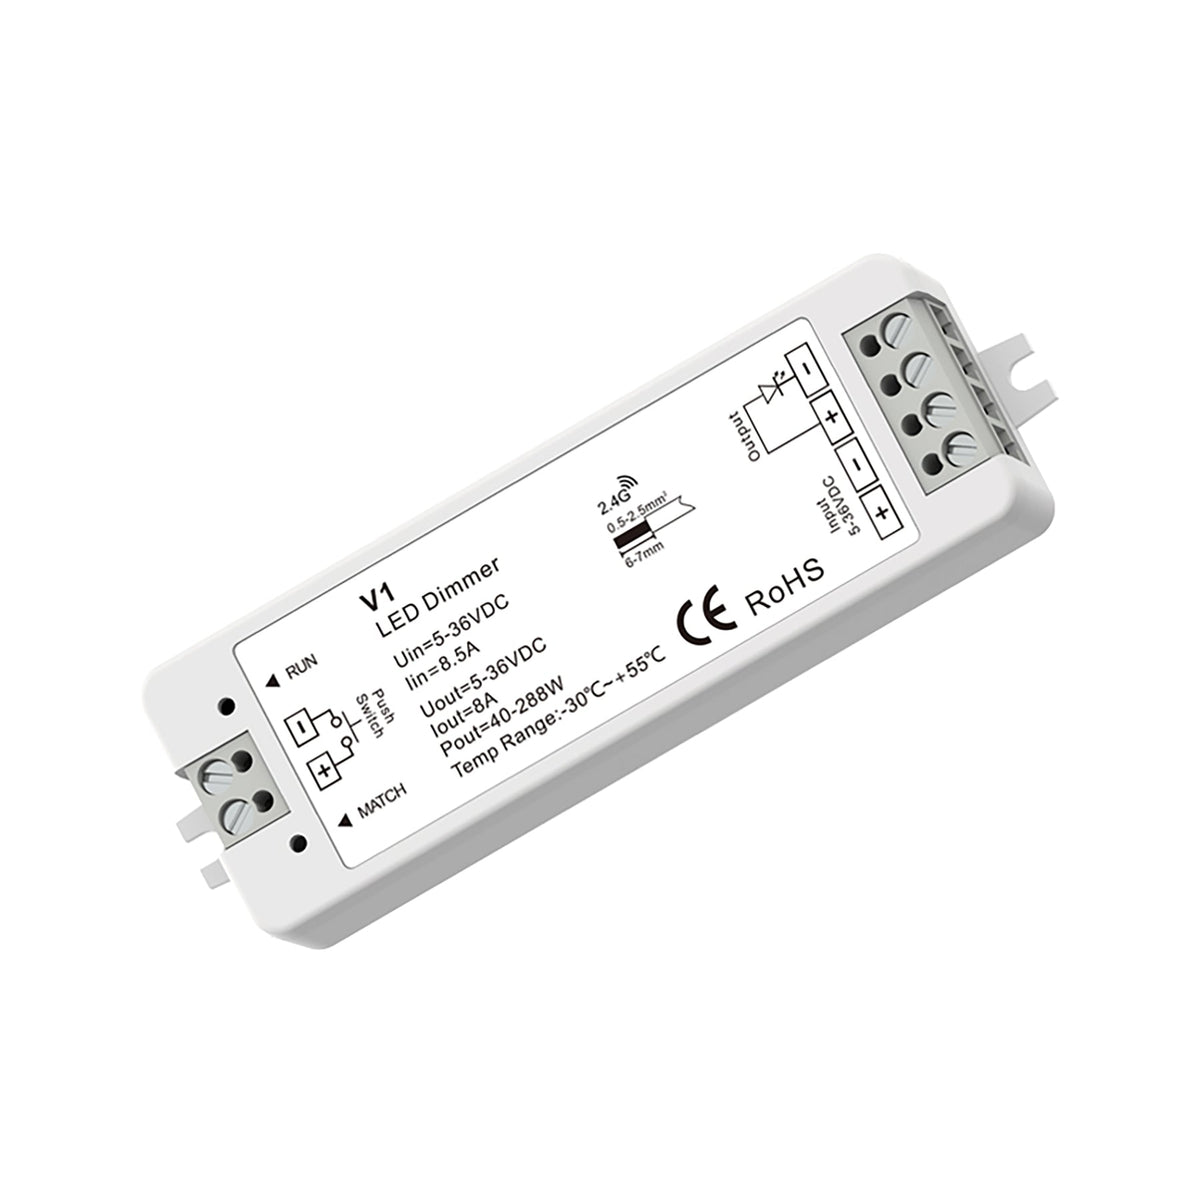 G.W.S. LED LED 5-36V DC Dimming Controller V1 + 1 Zone Panel Remote Control 1*CR2032 Battery TW1